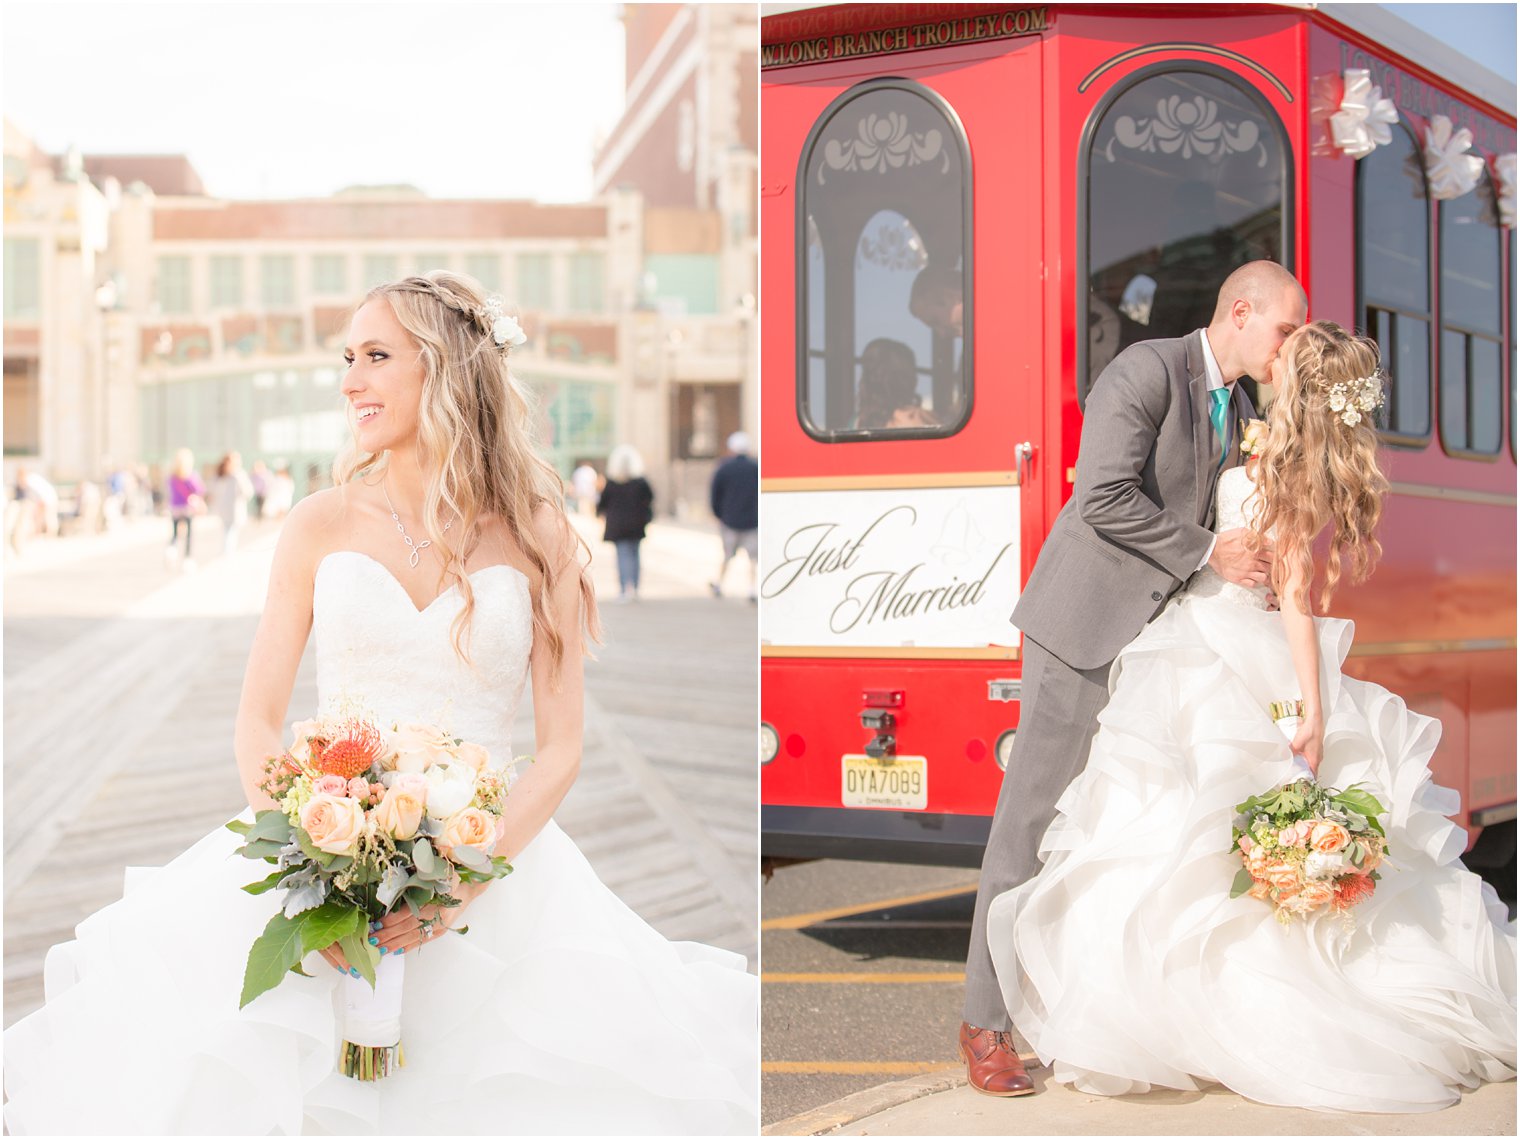 Fun jersey shore wedding with Long Branch Trolley